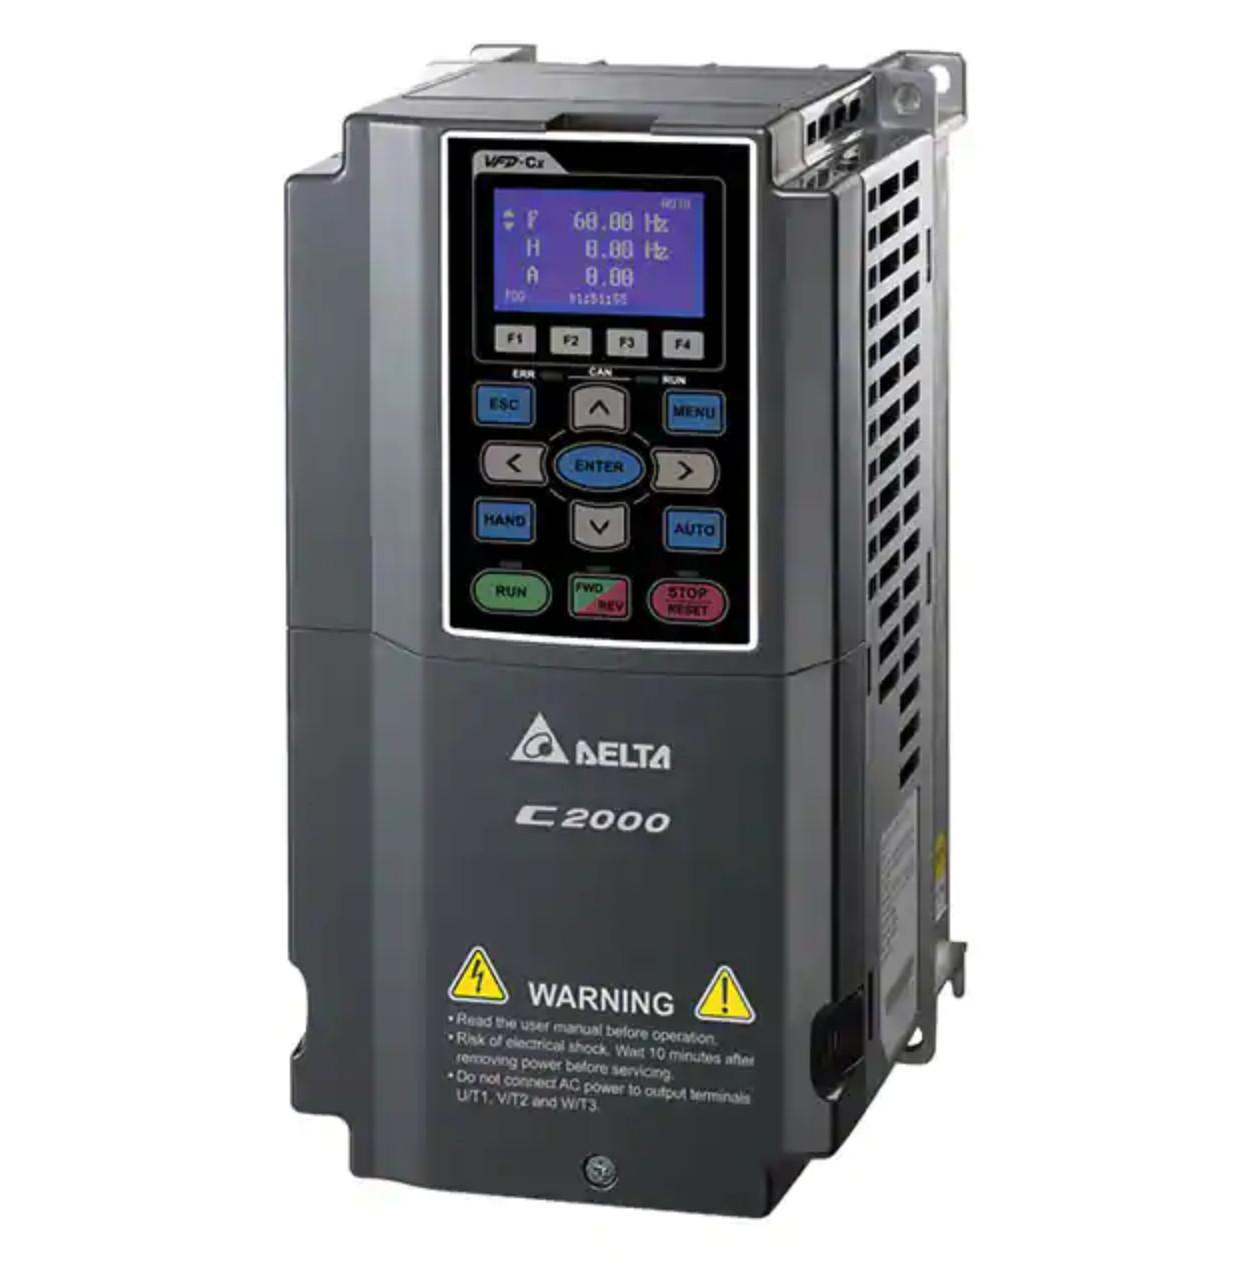 Delta VFD037C23A-21 Variable Frequency Drive, 3 phase, 230 VAC Input, 5 HP, frame A, wall mount, IP20, NEMA 1